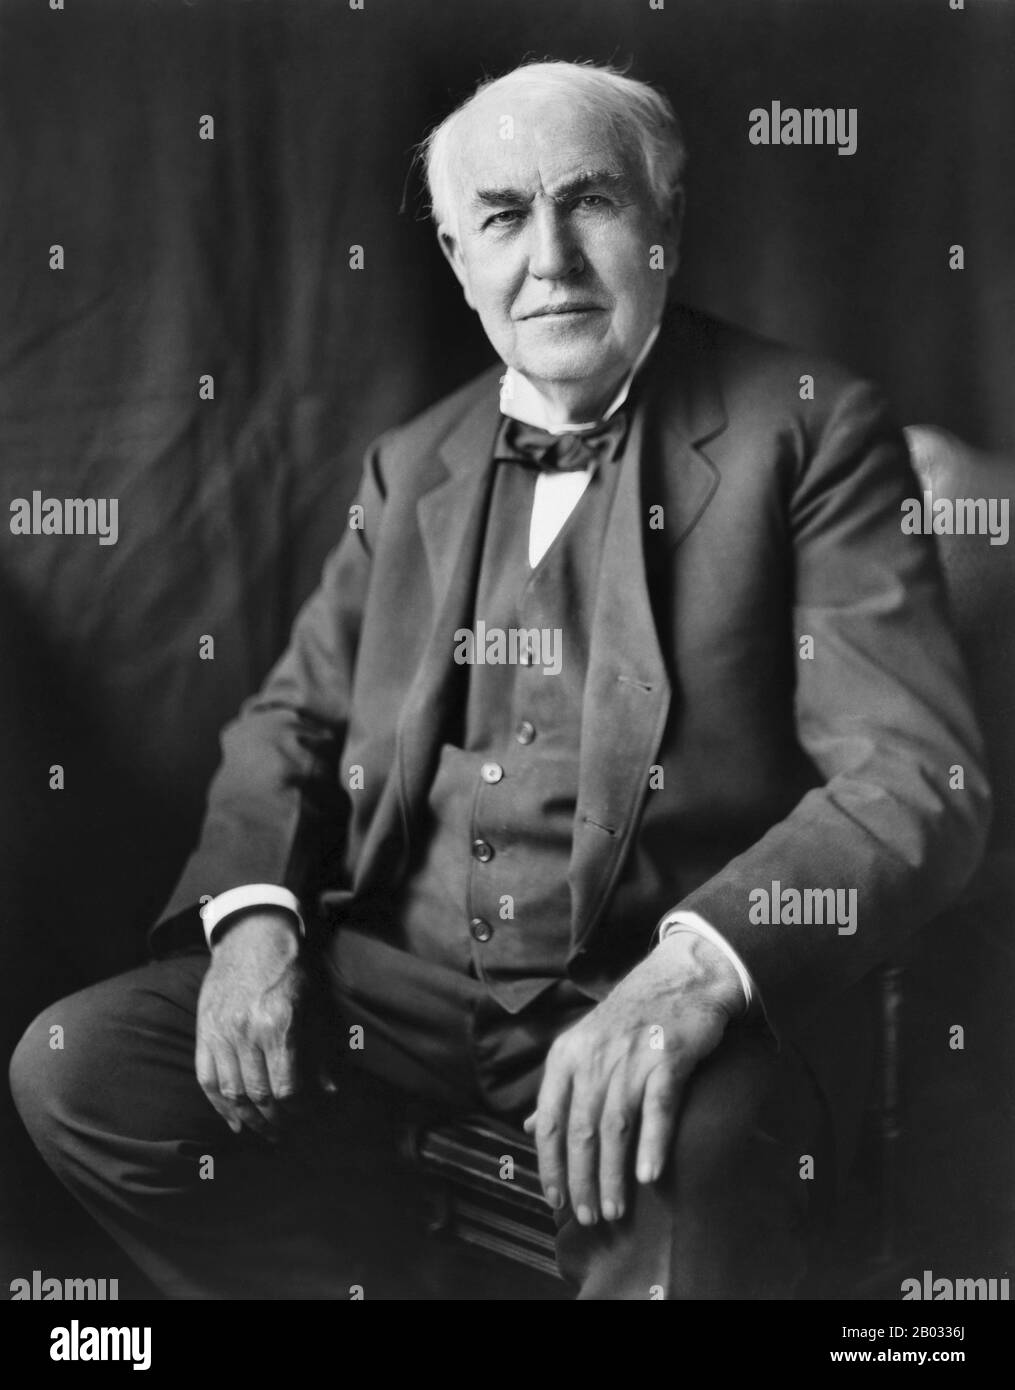 Thomas Alva Edison (February 11, 1847 – October 18, 1931) was an American inventor and businessman. He developed many devices that greatly influenced life around the world, including the phonograph, the motion picture camera, and the long-lasting, practical electric light bulb.  Edison was a prolific inventor, holding 1,093 US patents in his name, as well as many patents in the United Kingdom, France, and Germany. More significant than the number of Edison's patents was the widespread impact of his inventions: electric light and power utilities, sound recording, and motion pictures all establi Stock Photo